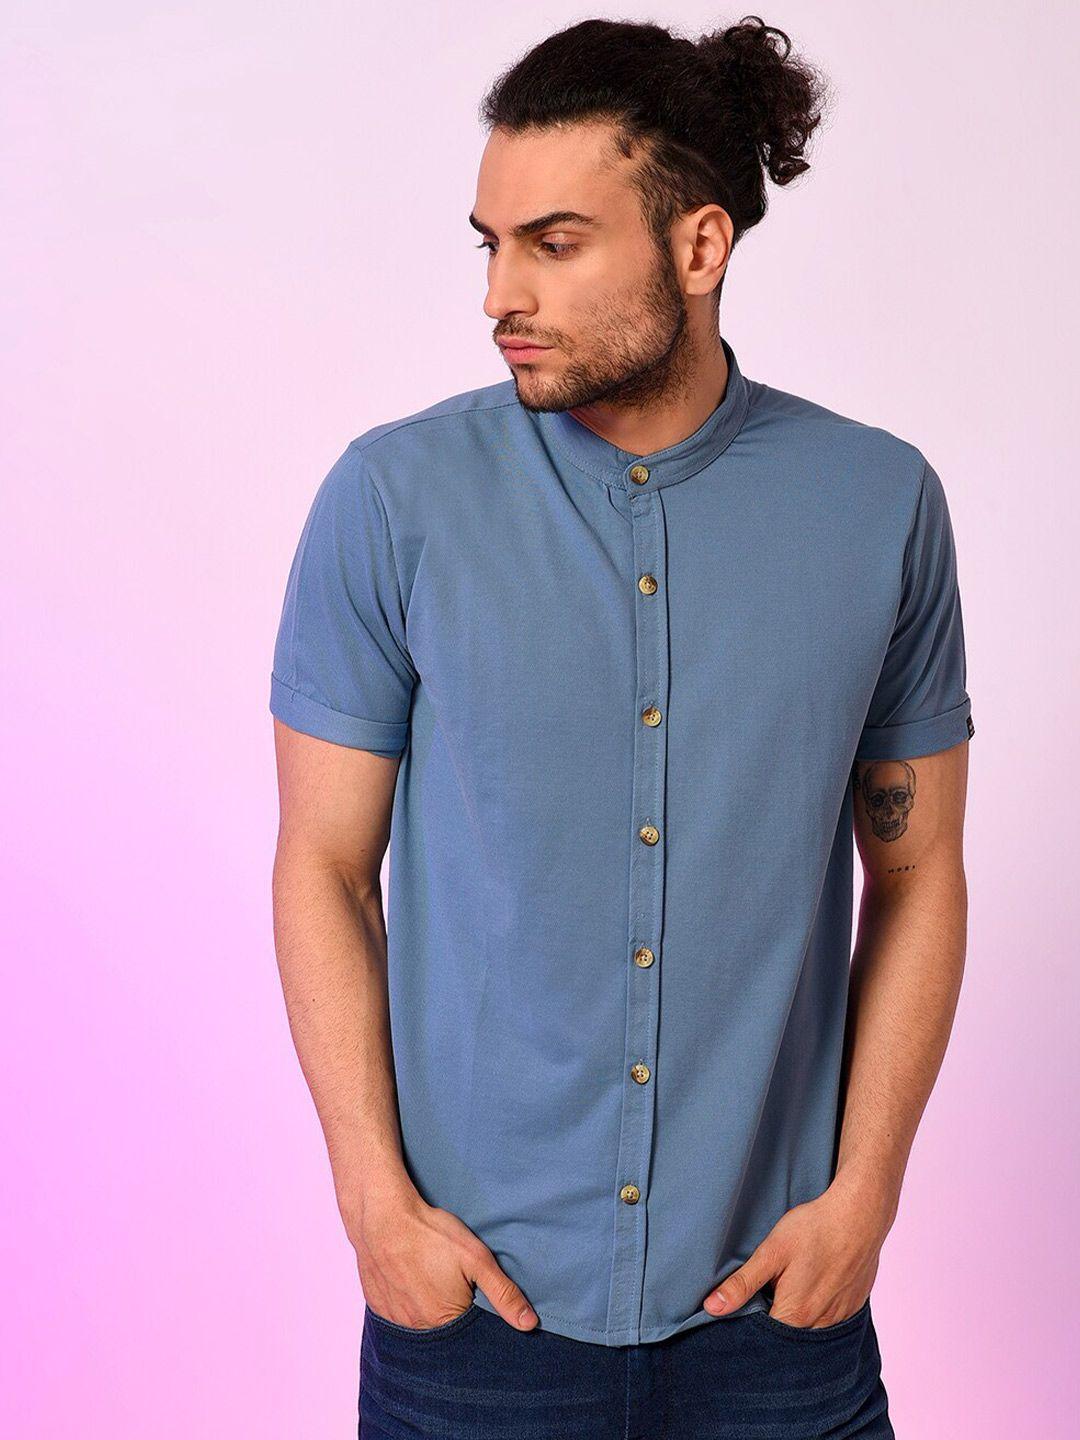 campus-sutra-men-teal-classic-casual-shirt